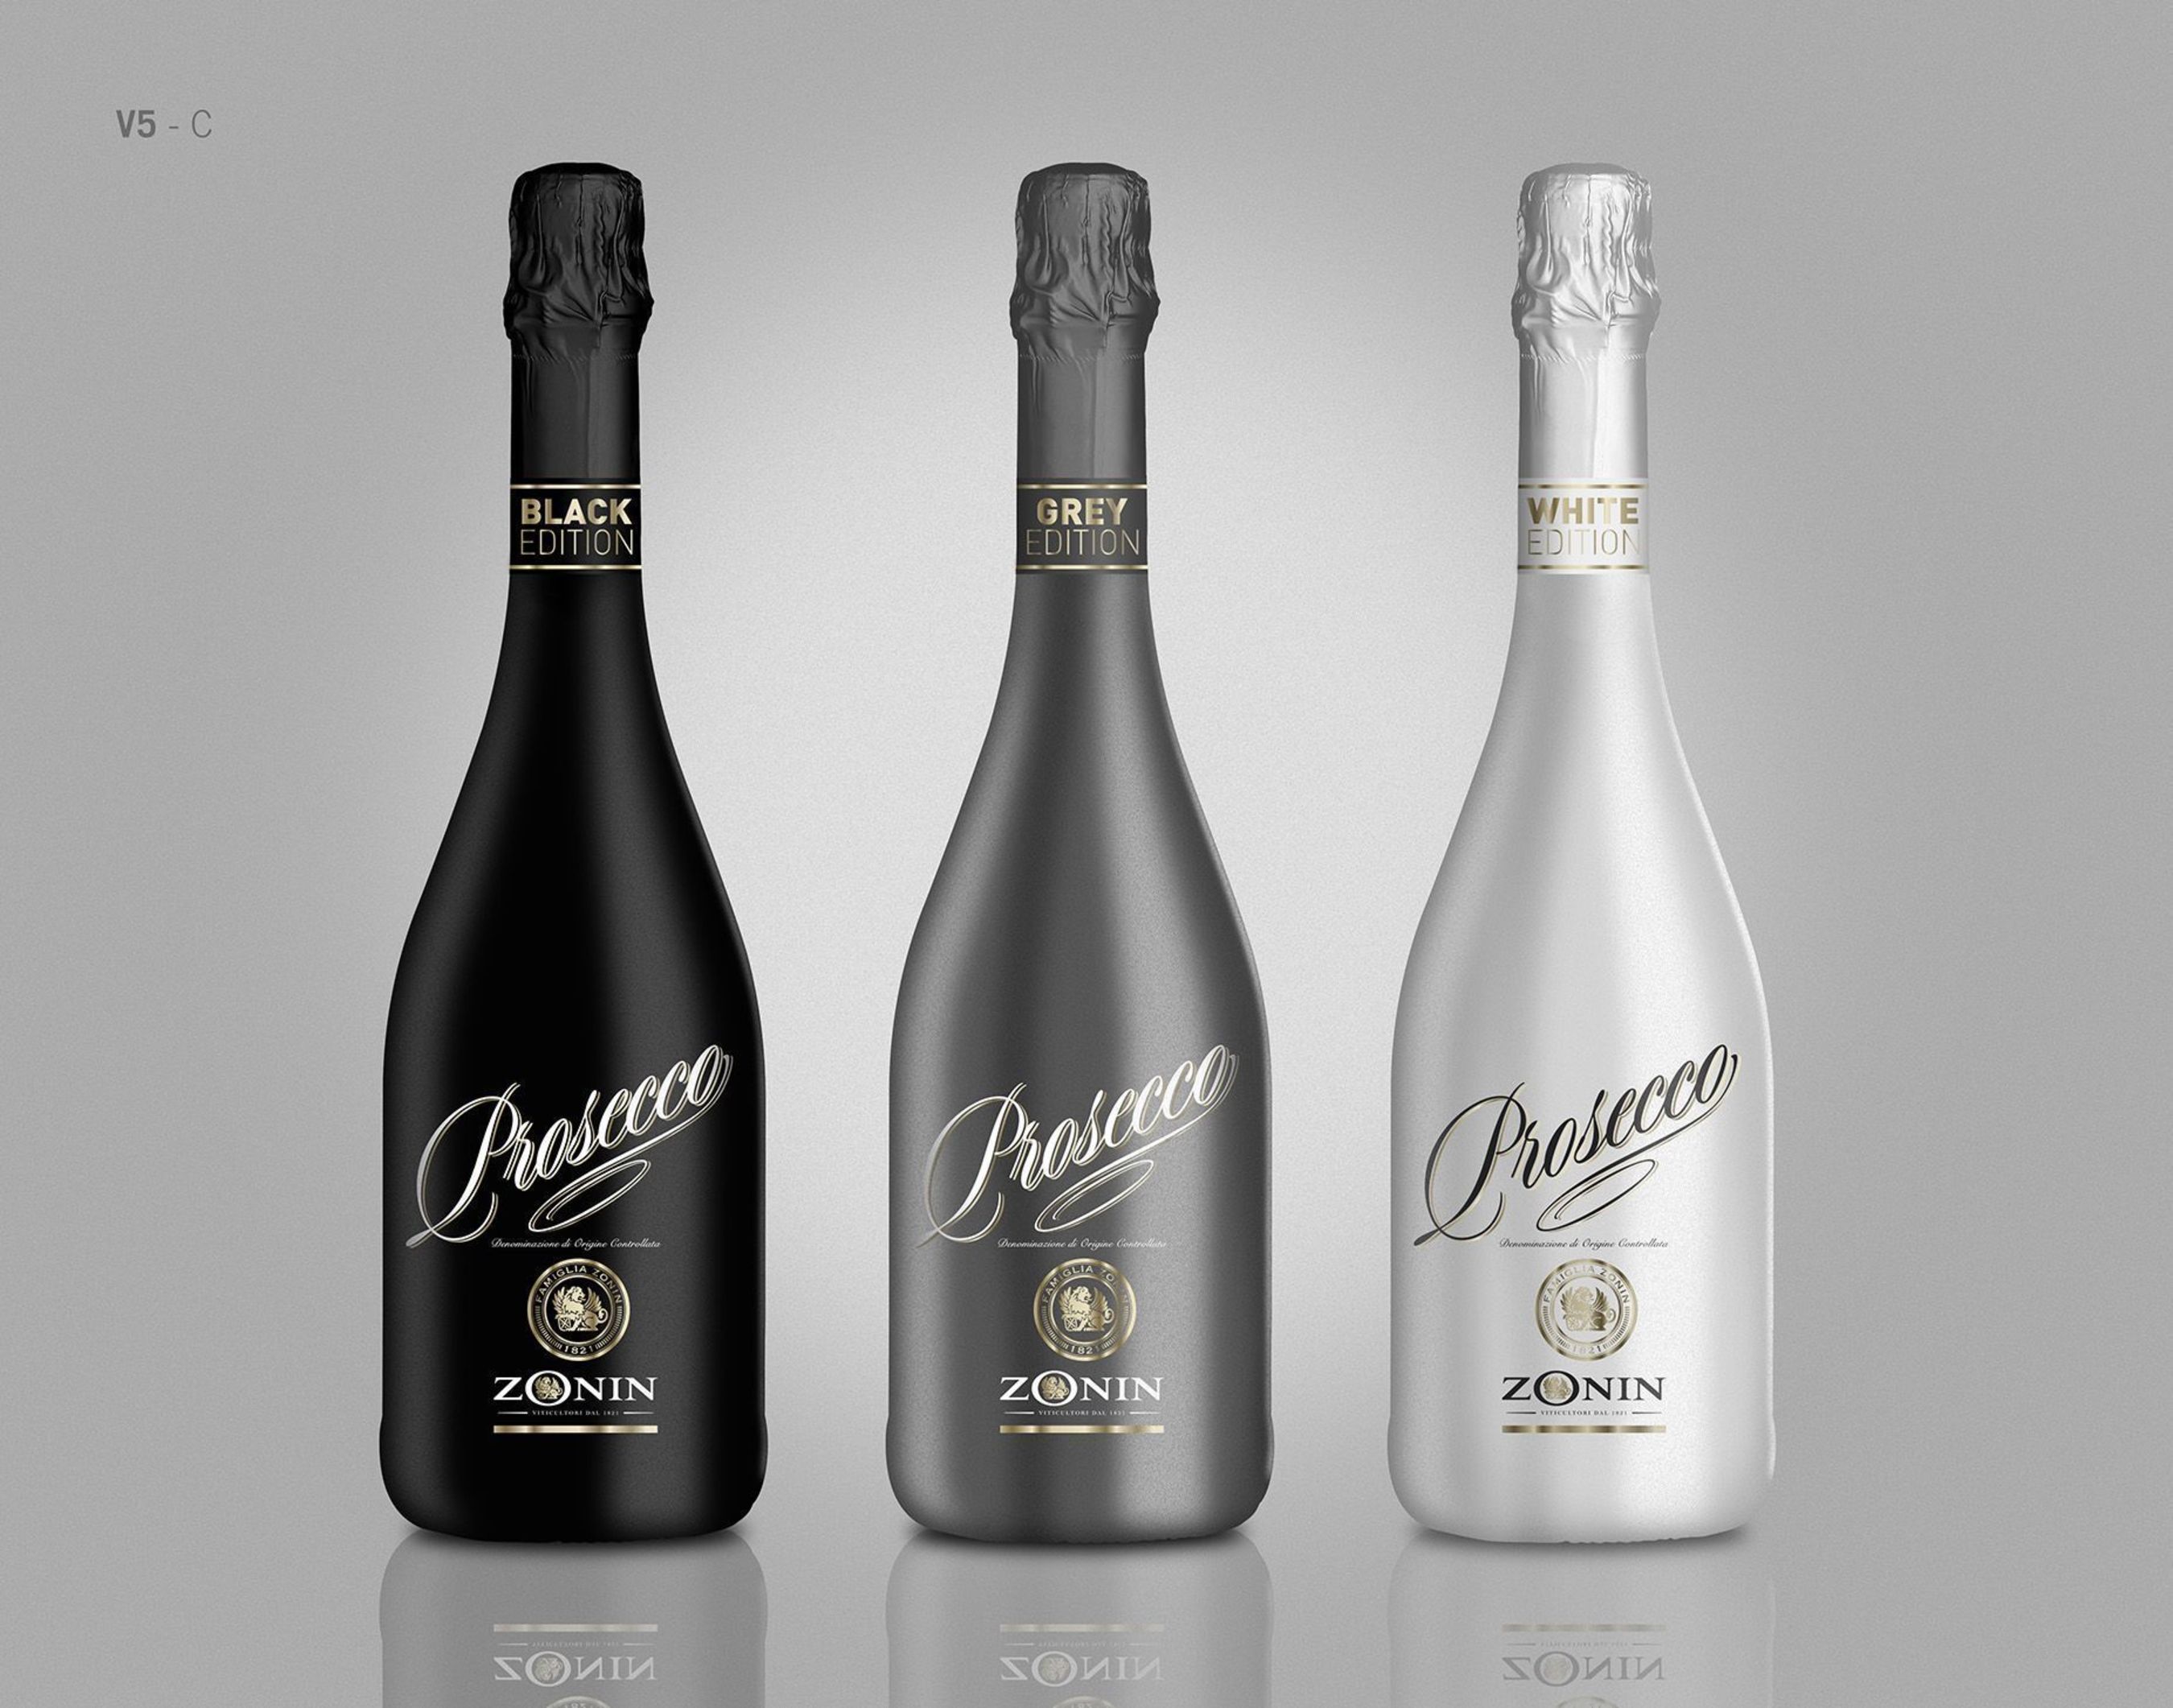 "Dress Your Feelings": Zonin Launches Prosecco Black, Grey and White Editions (PRNewsFoto/Zonin 1821)